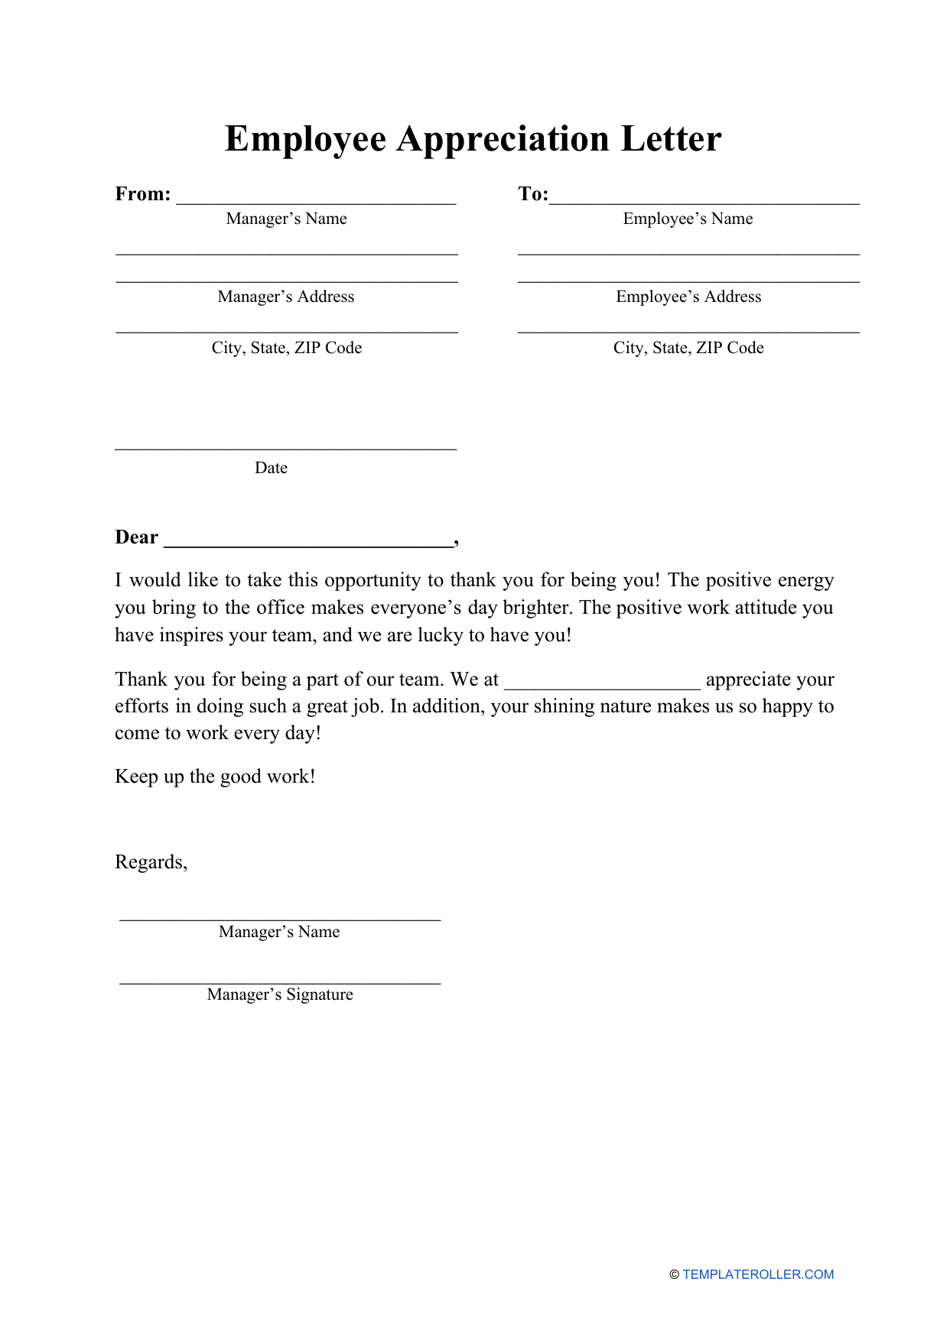 Employee Appreciation Letter Template, Page 1